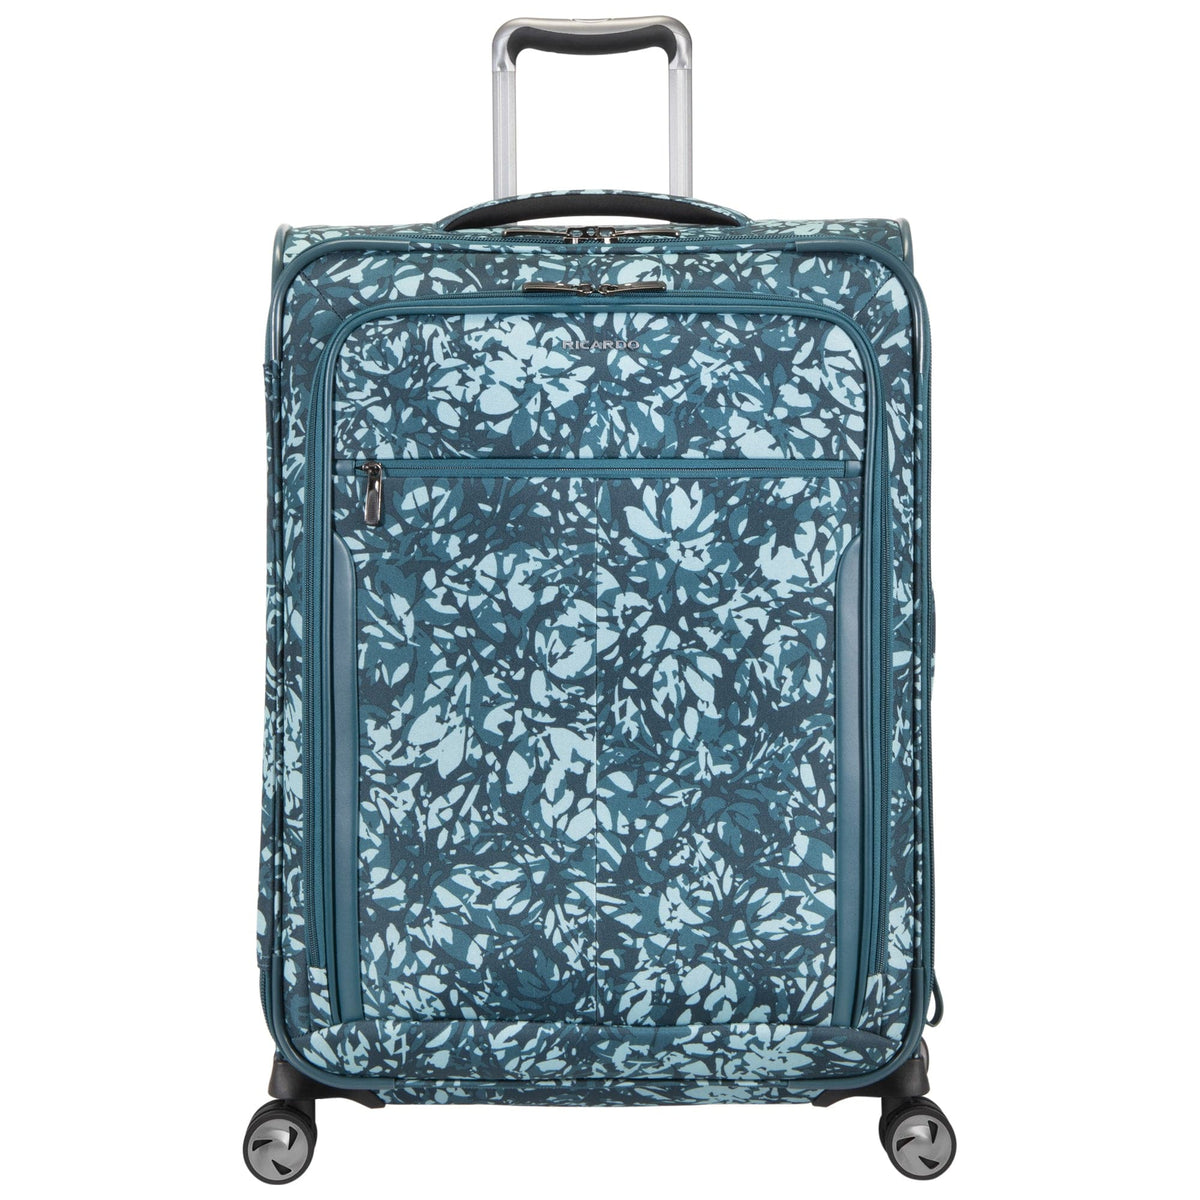 Ricardo Beverly Hills Seahaven 2.0 Medium Check-In Luggage